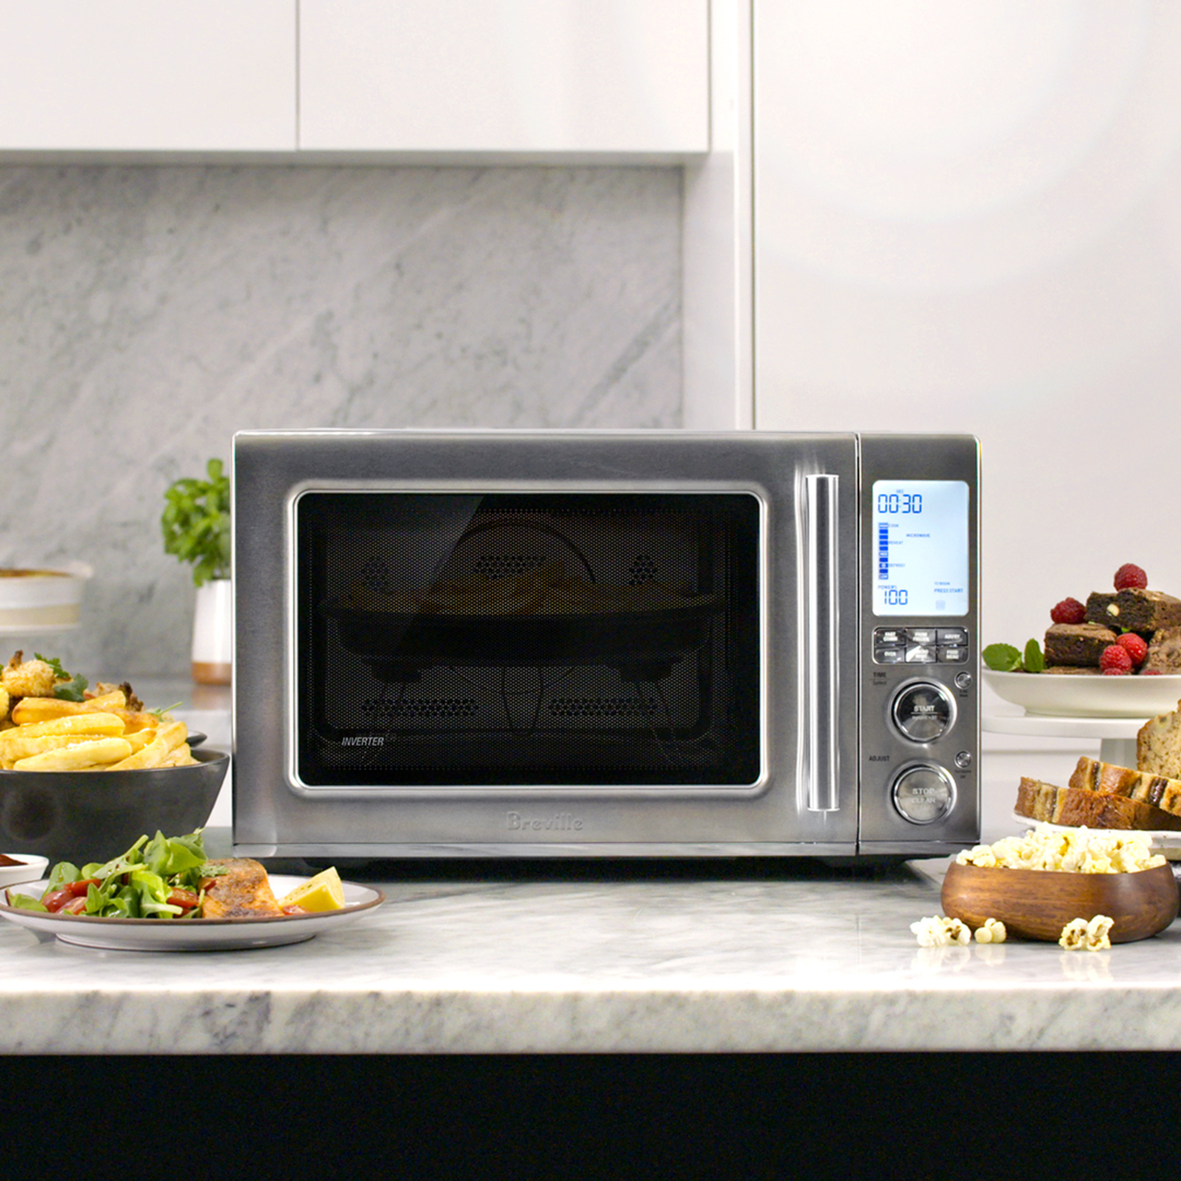 The Best Countertop Microwave: the Breville Combi Wave 3-in-1 Microwave